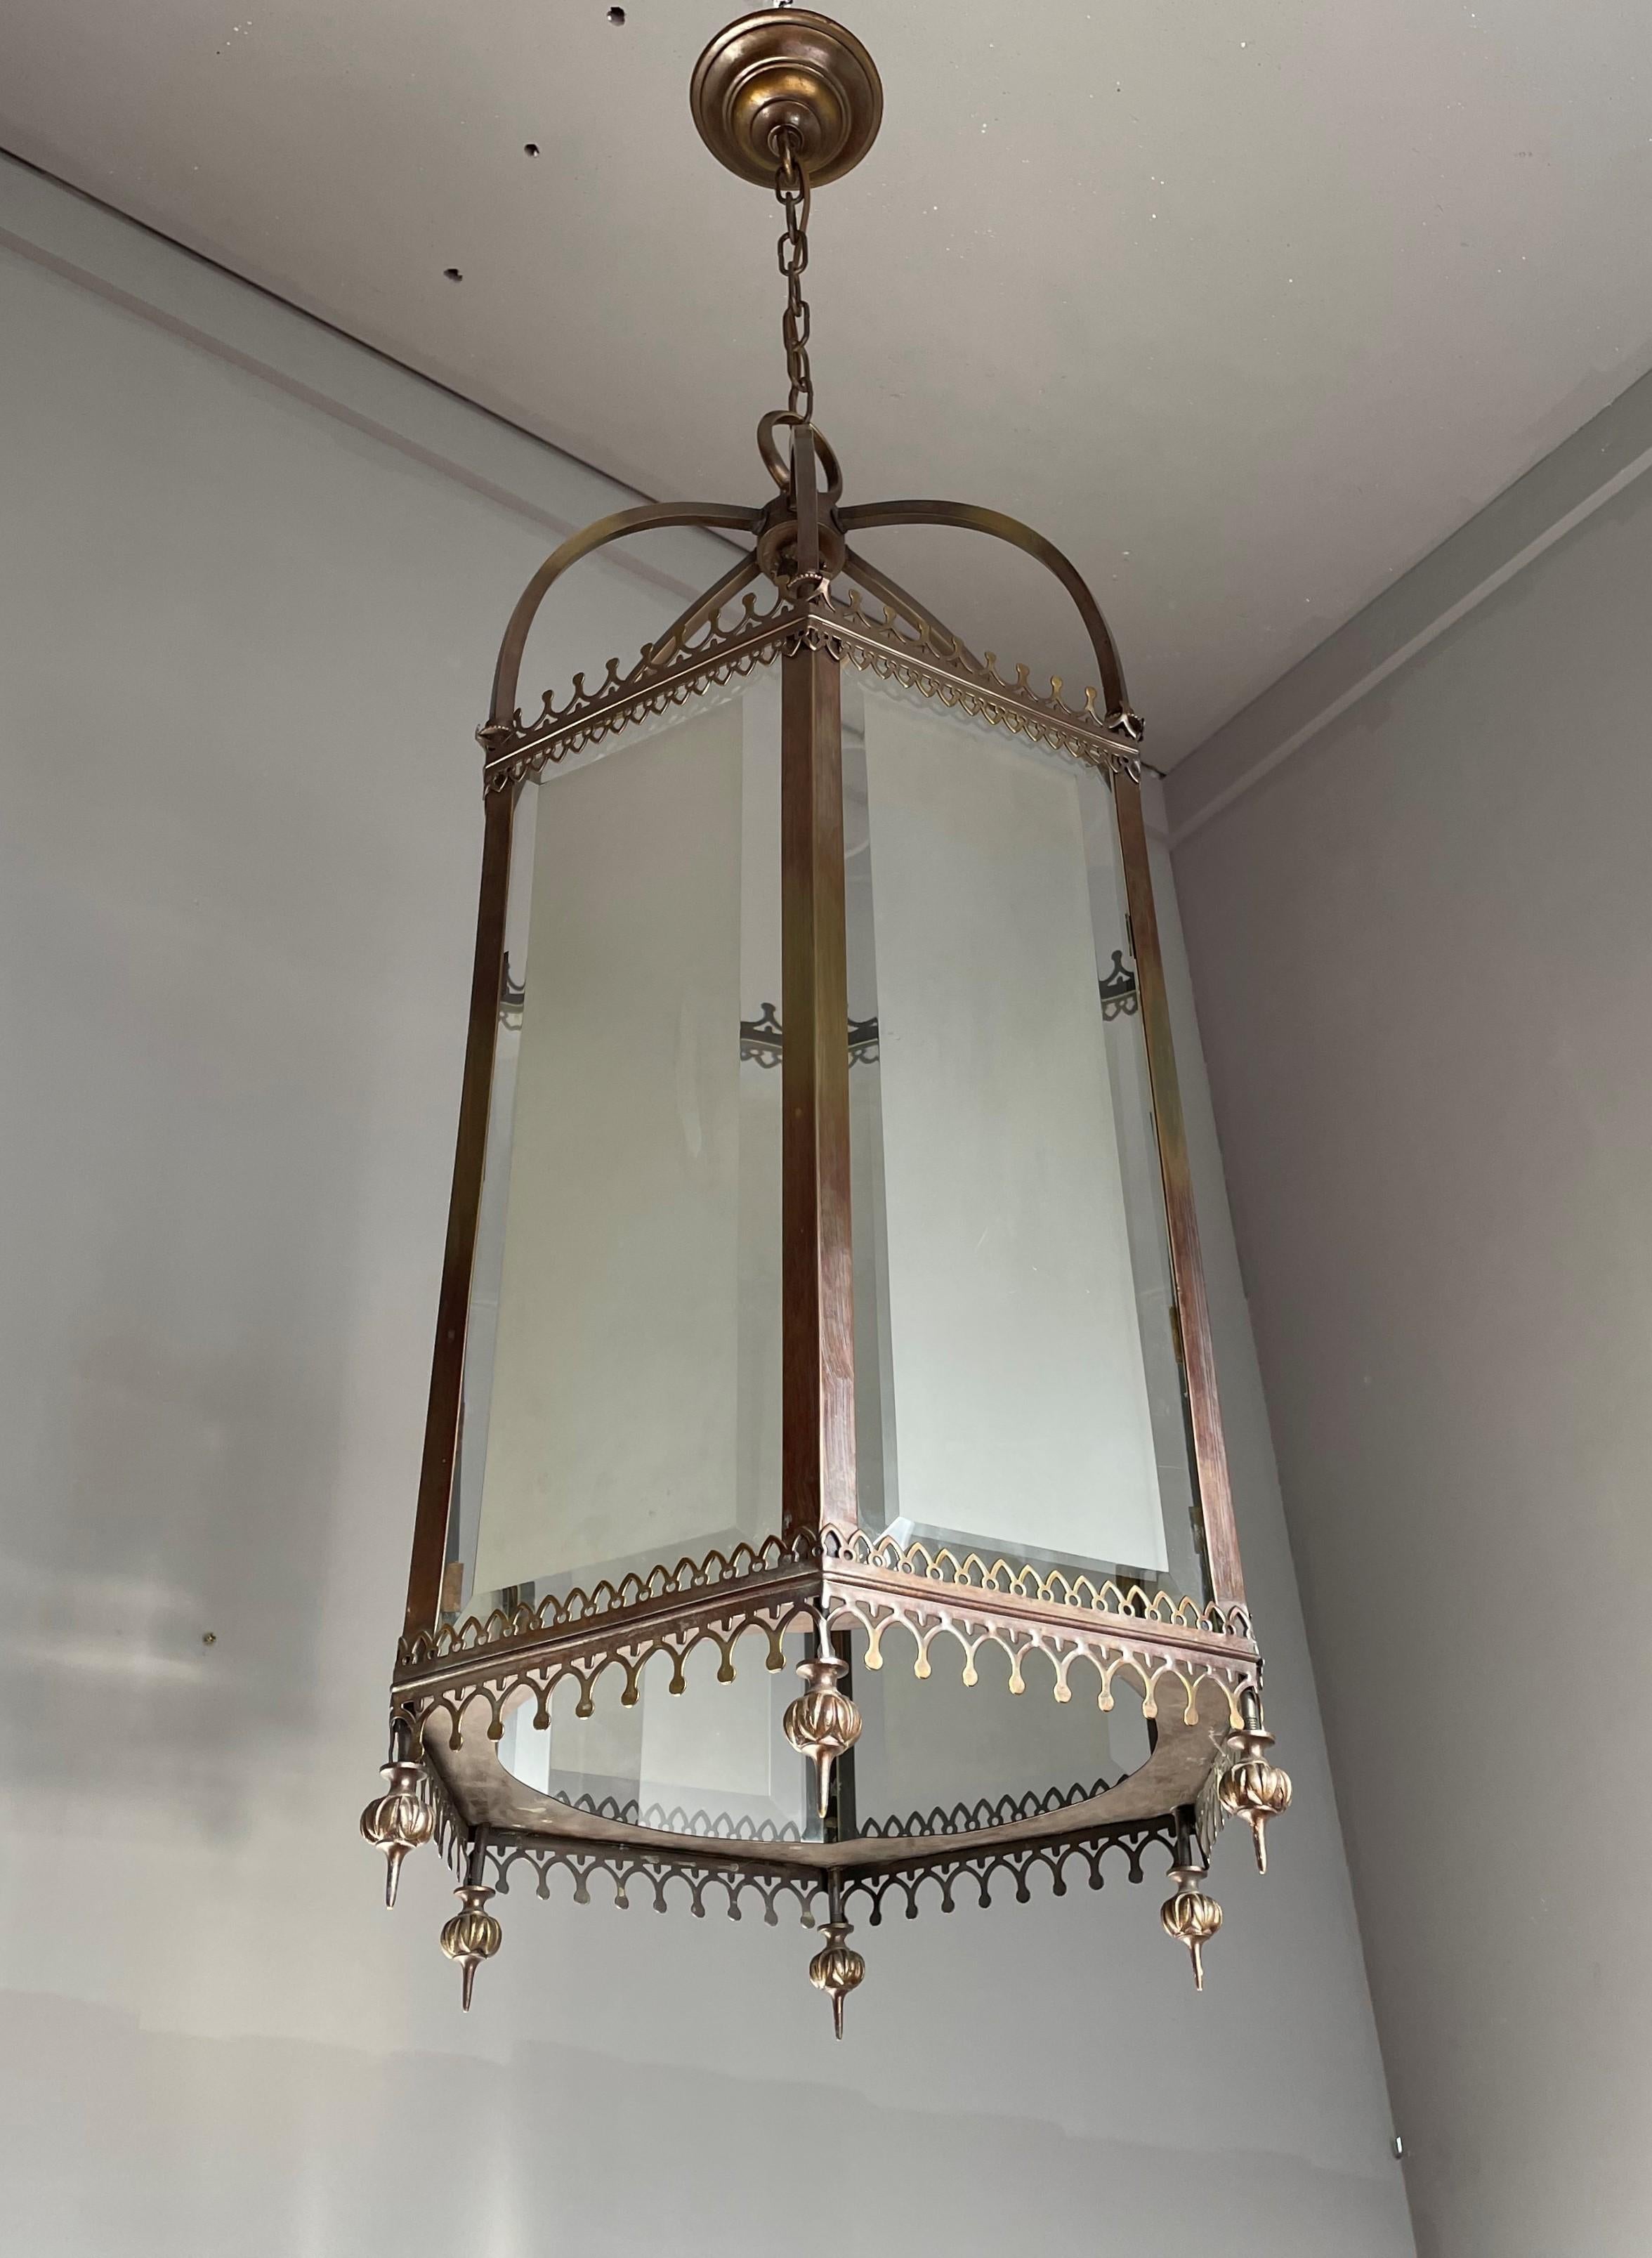 European Antique and Large Gothic Revival Bronze, Brass and Beveled Glass Lantern Pendant